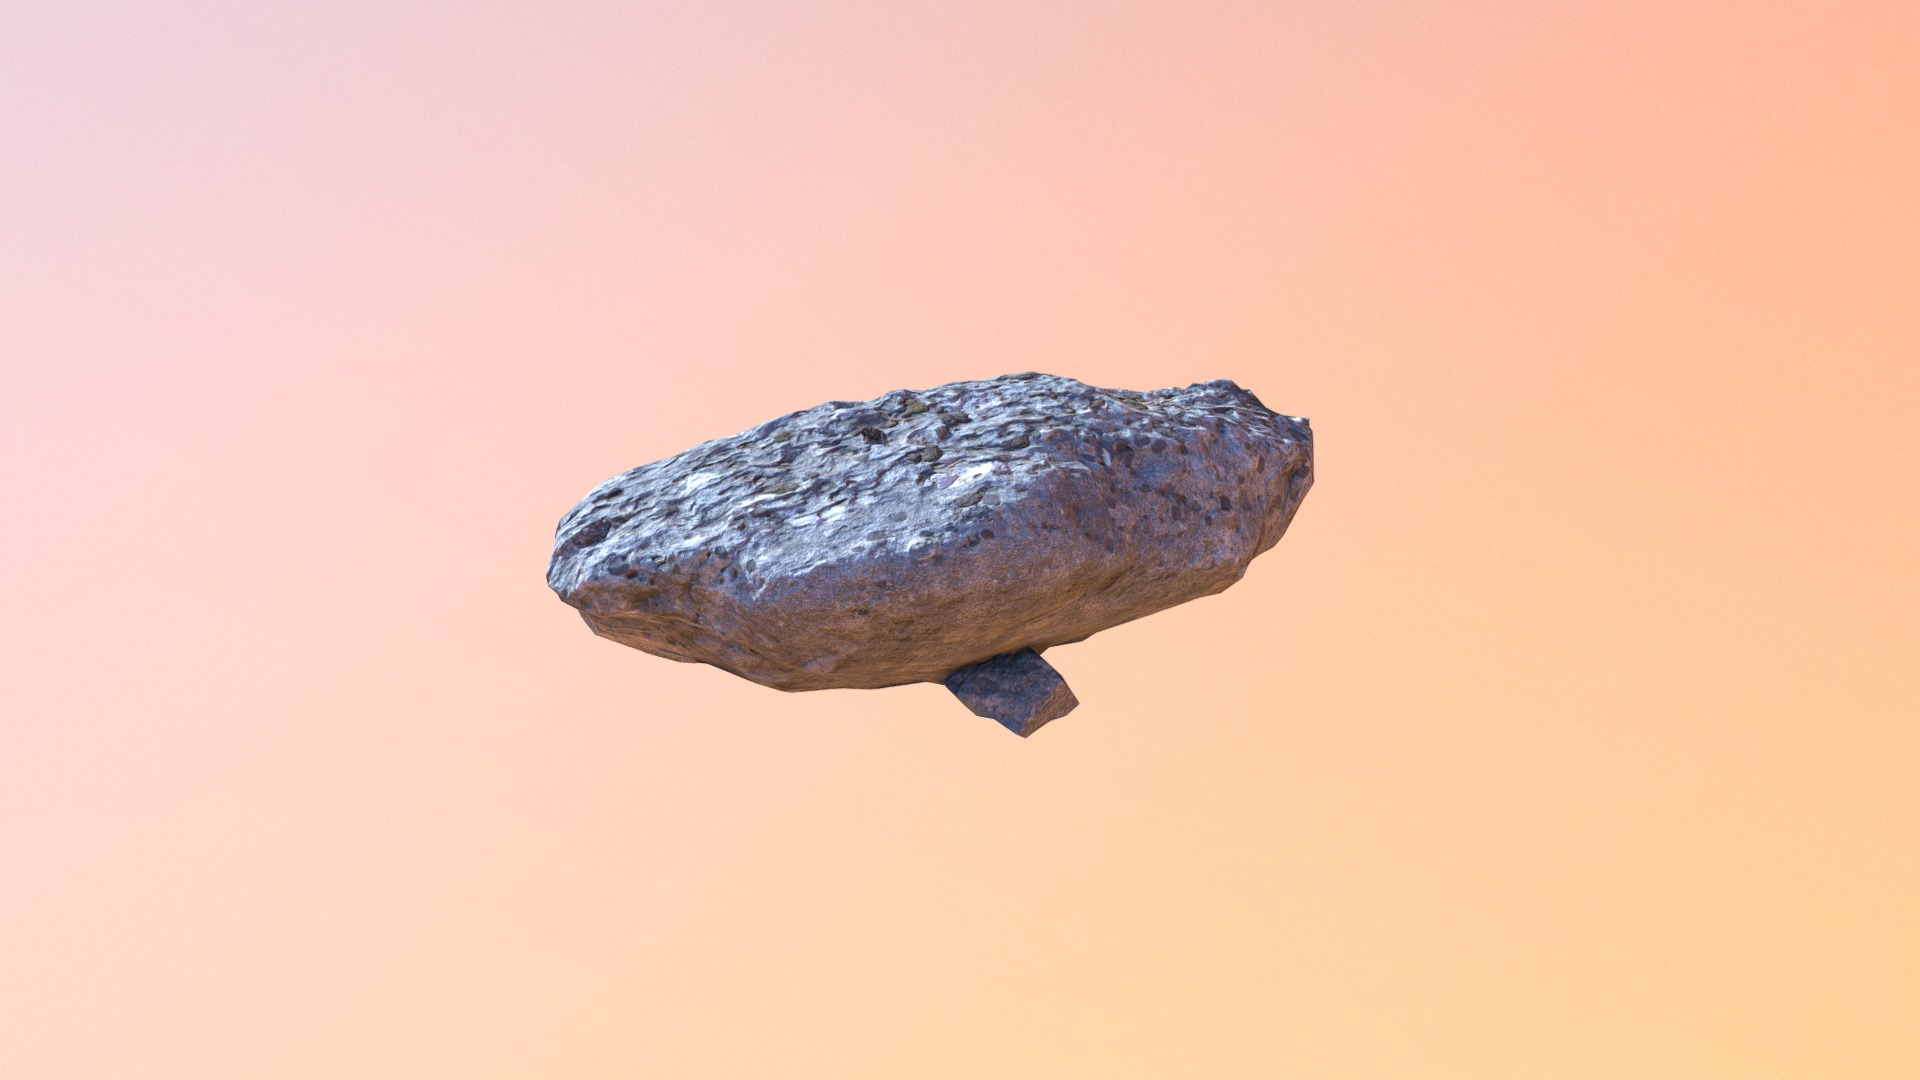 3D model Small Rock - This is a 3D model of the Small Rock. The 3D model is about a blue rock with a dark speckled surface.